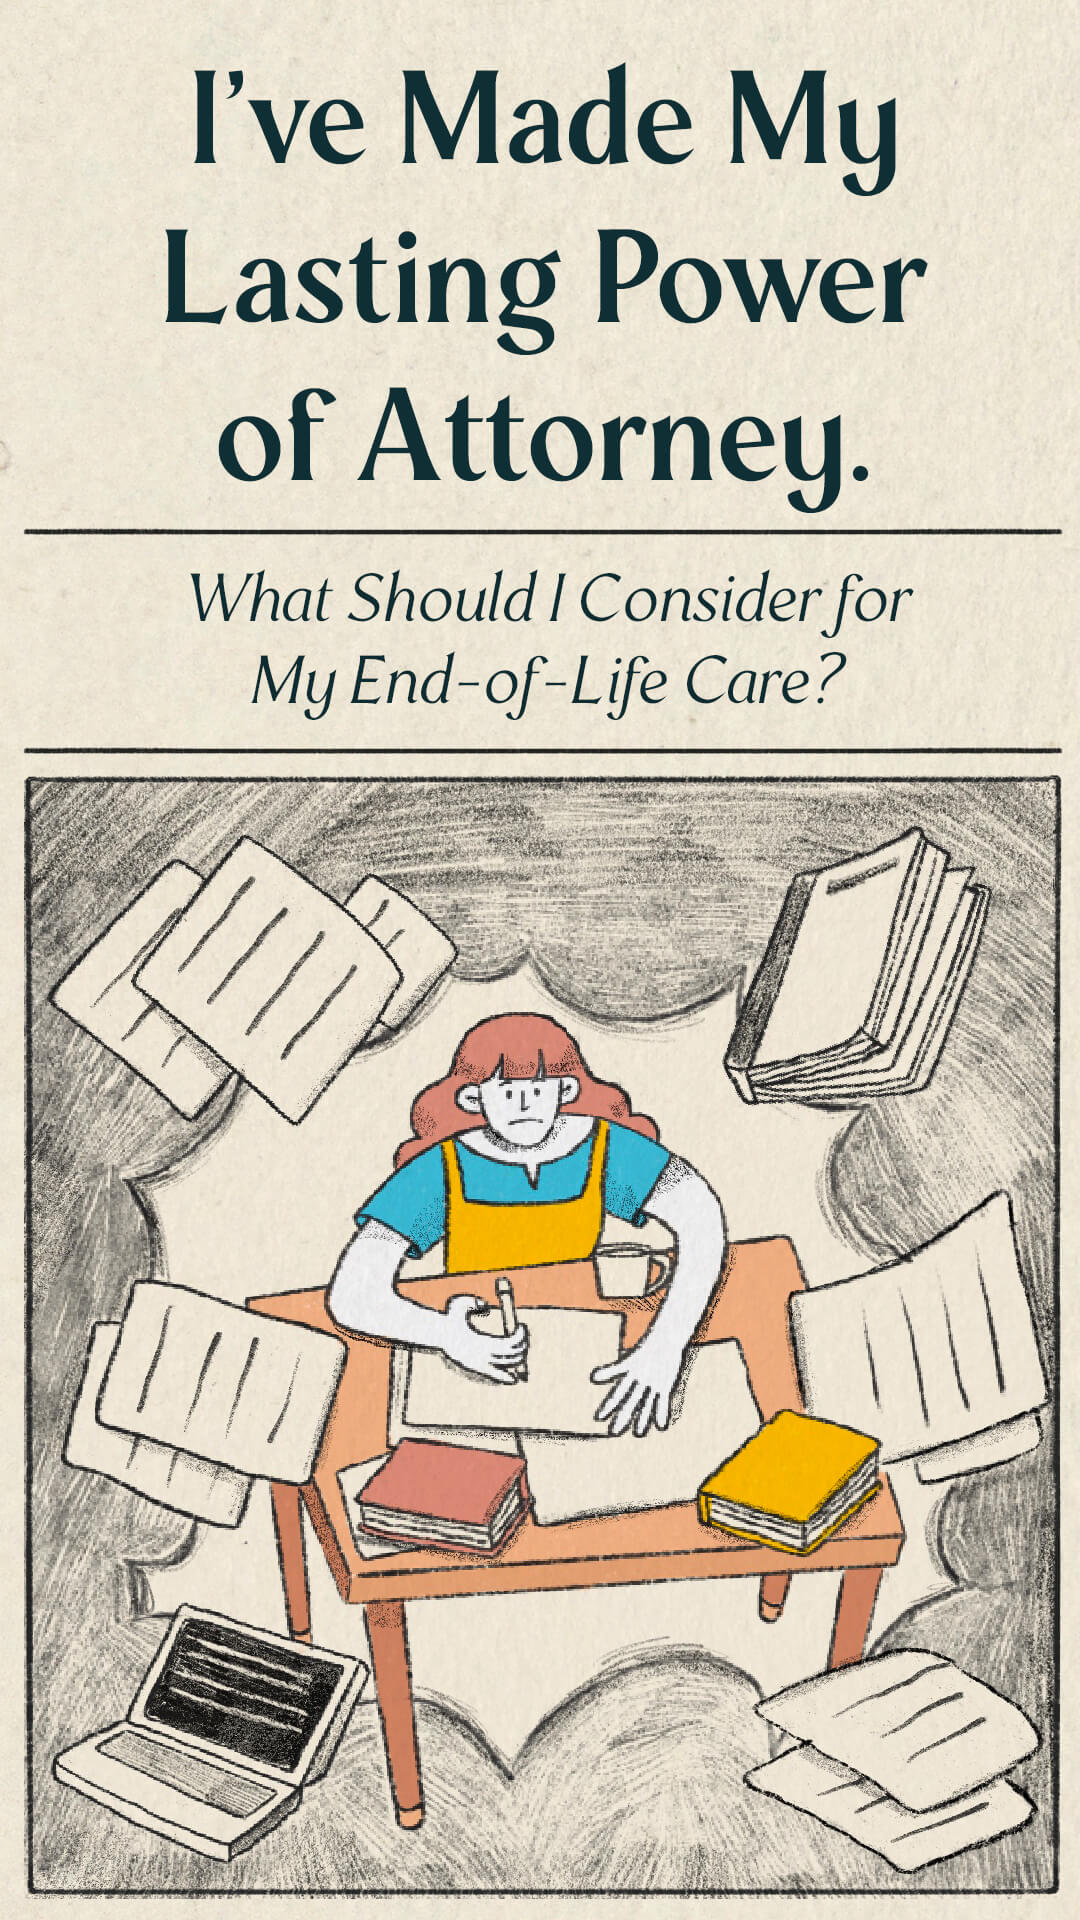 I've Made My Lasting Power of Attorney. What Should I Consider for My End-of-Life Care?